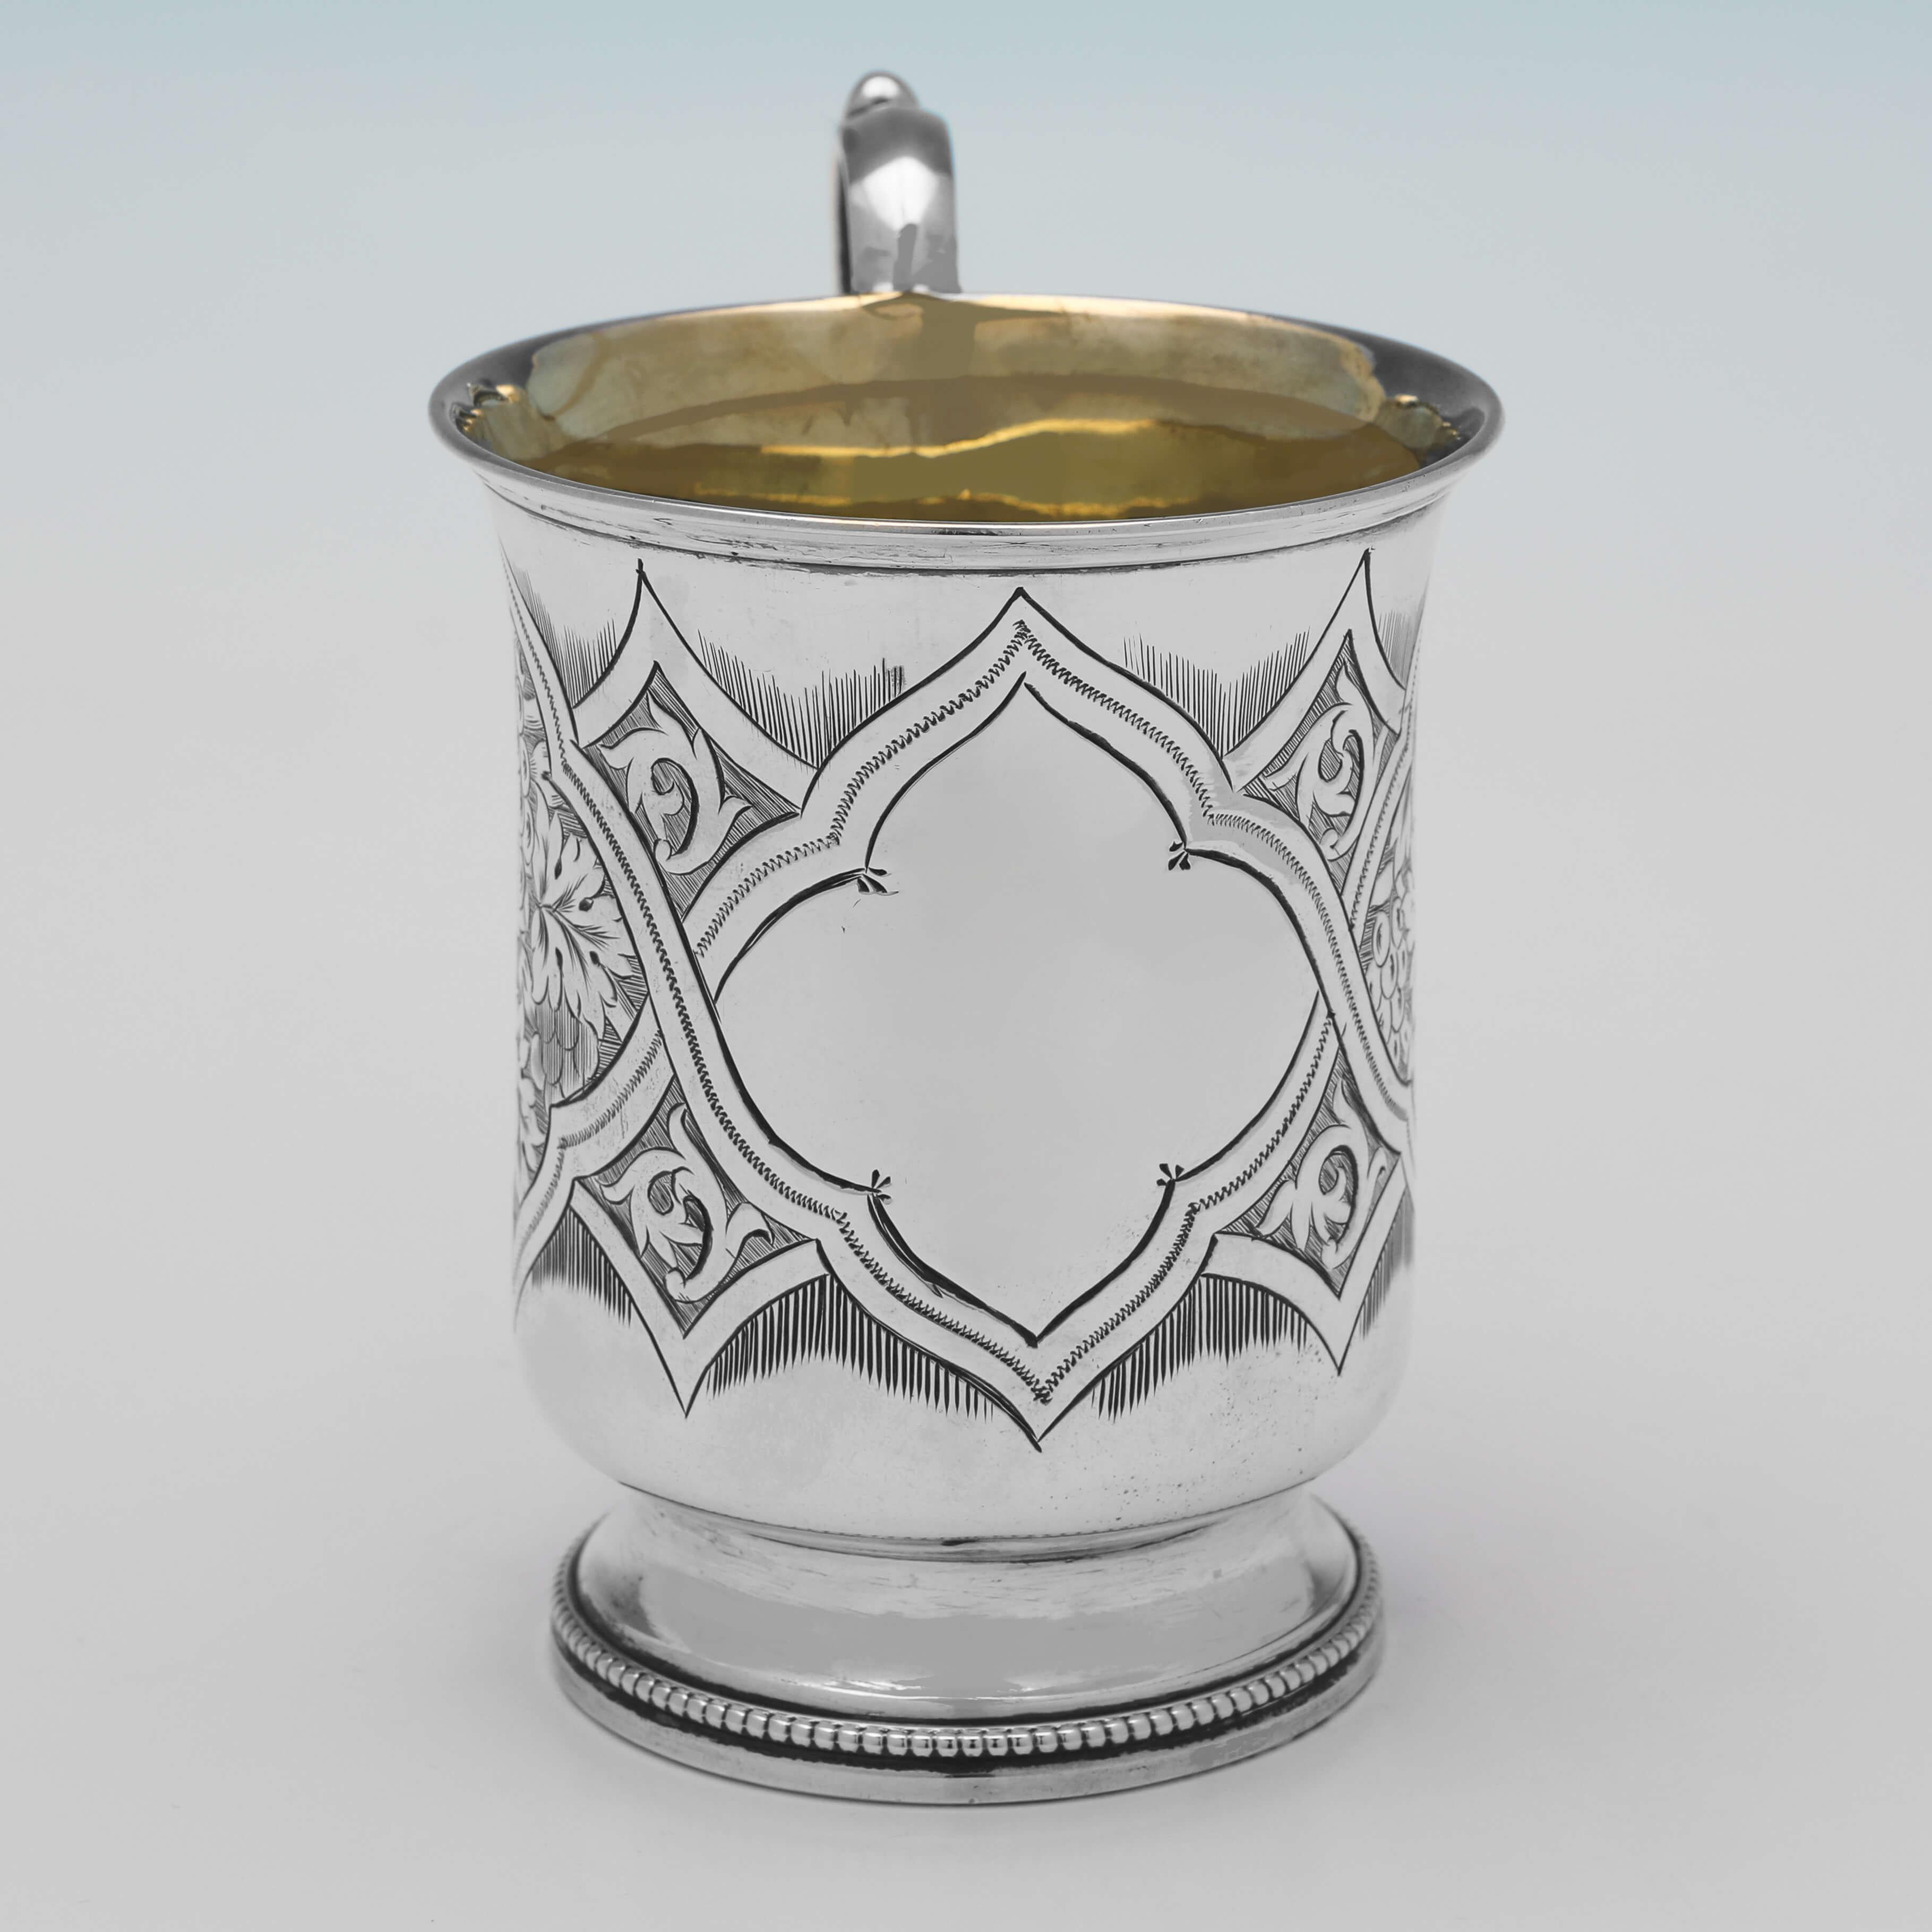 Hallmarked in Birmingham in 1863 by Hilliard & Thomason, this striking, Victorian, Antique Sterling Silver Christening Mug, features wonderful engraved decoration to the body, bead borders, and a gilt interior. 

The christening mug measures